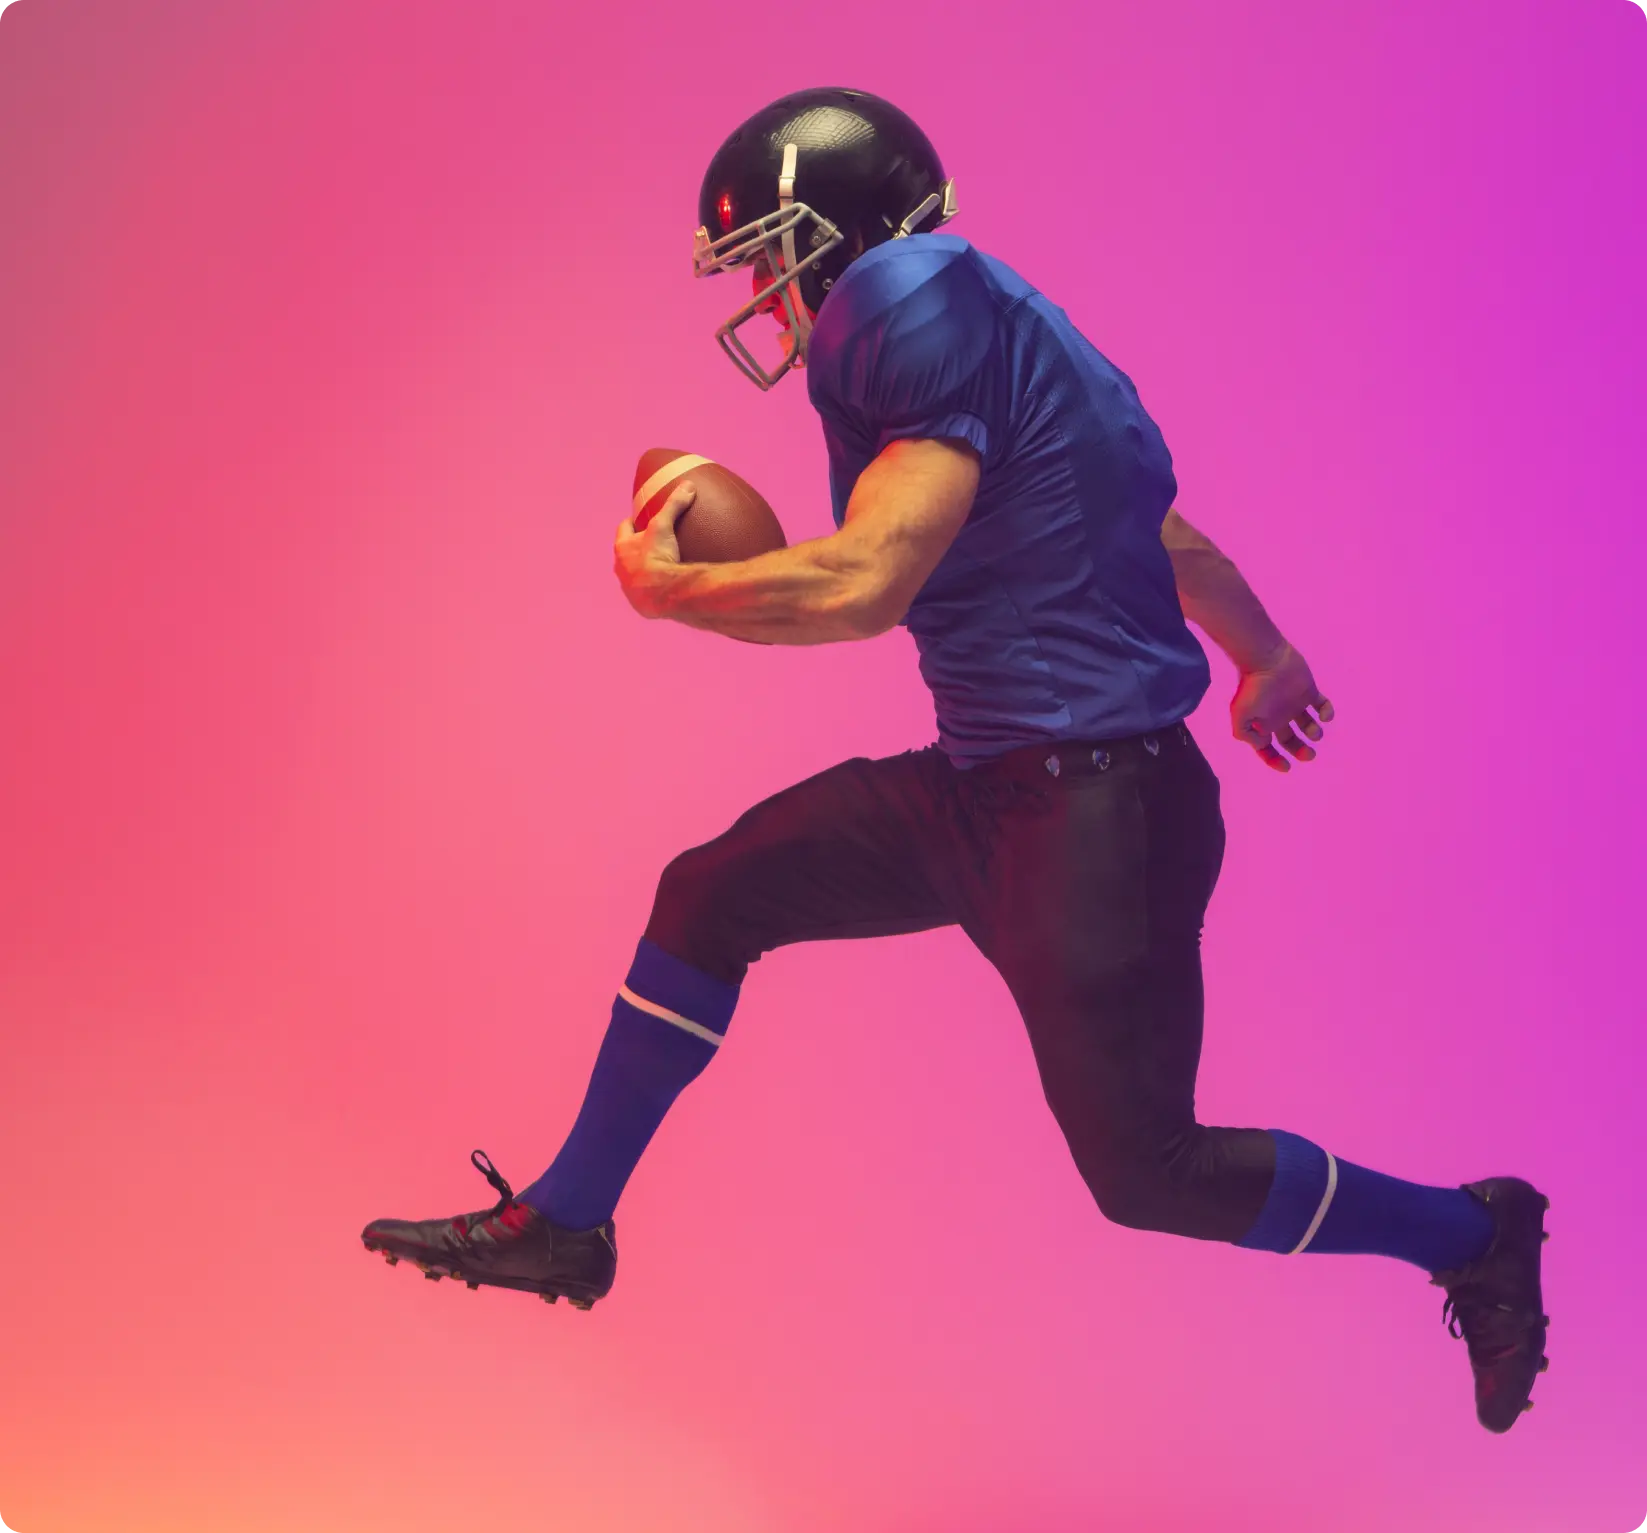 Soccer/Football athlete wearing a blue shirt and black football helmet jumping while holding a football in his hand